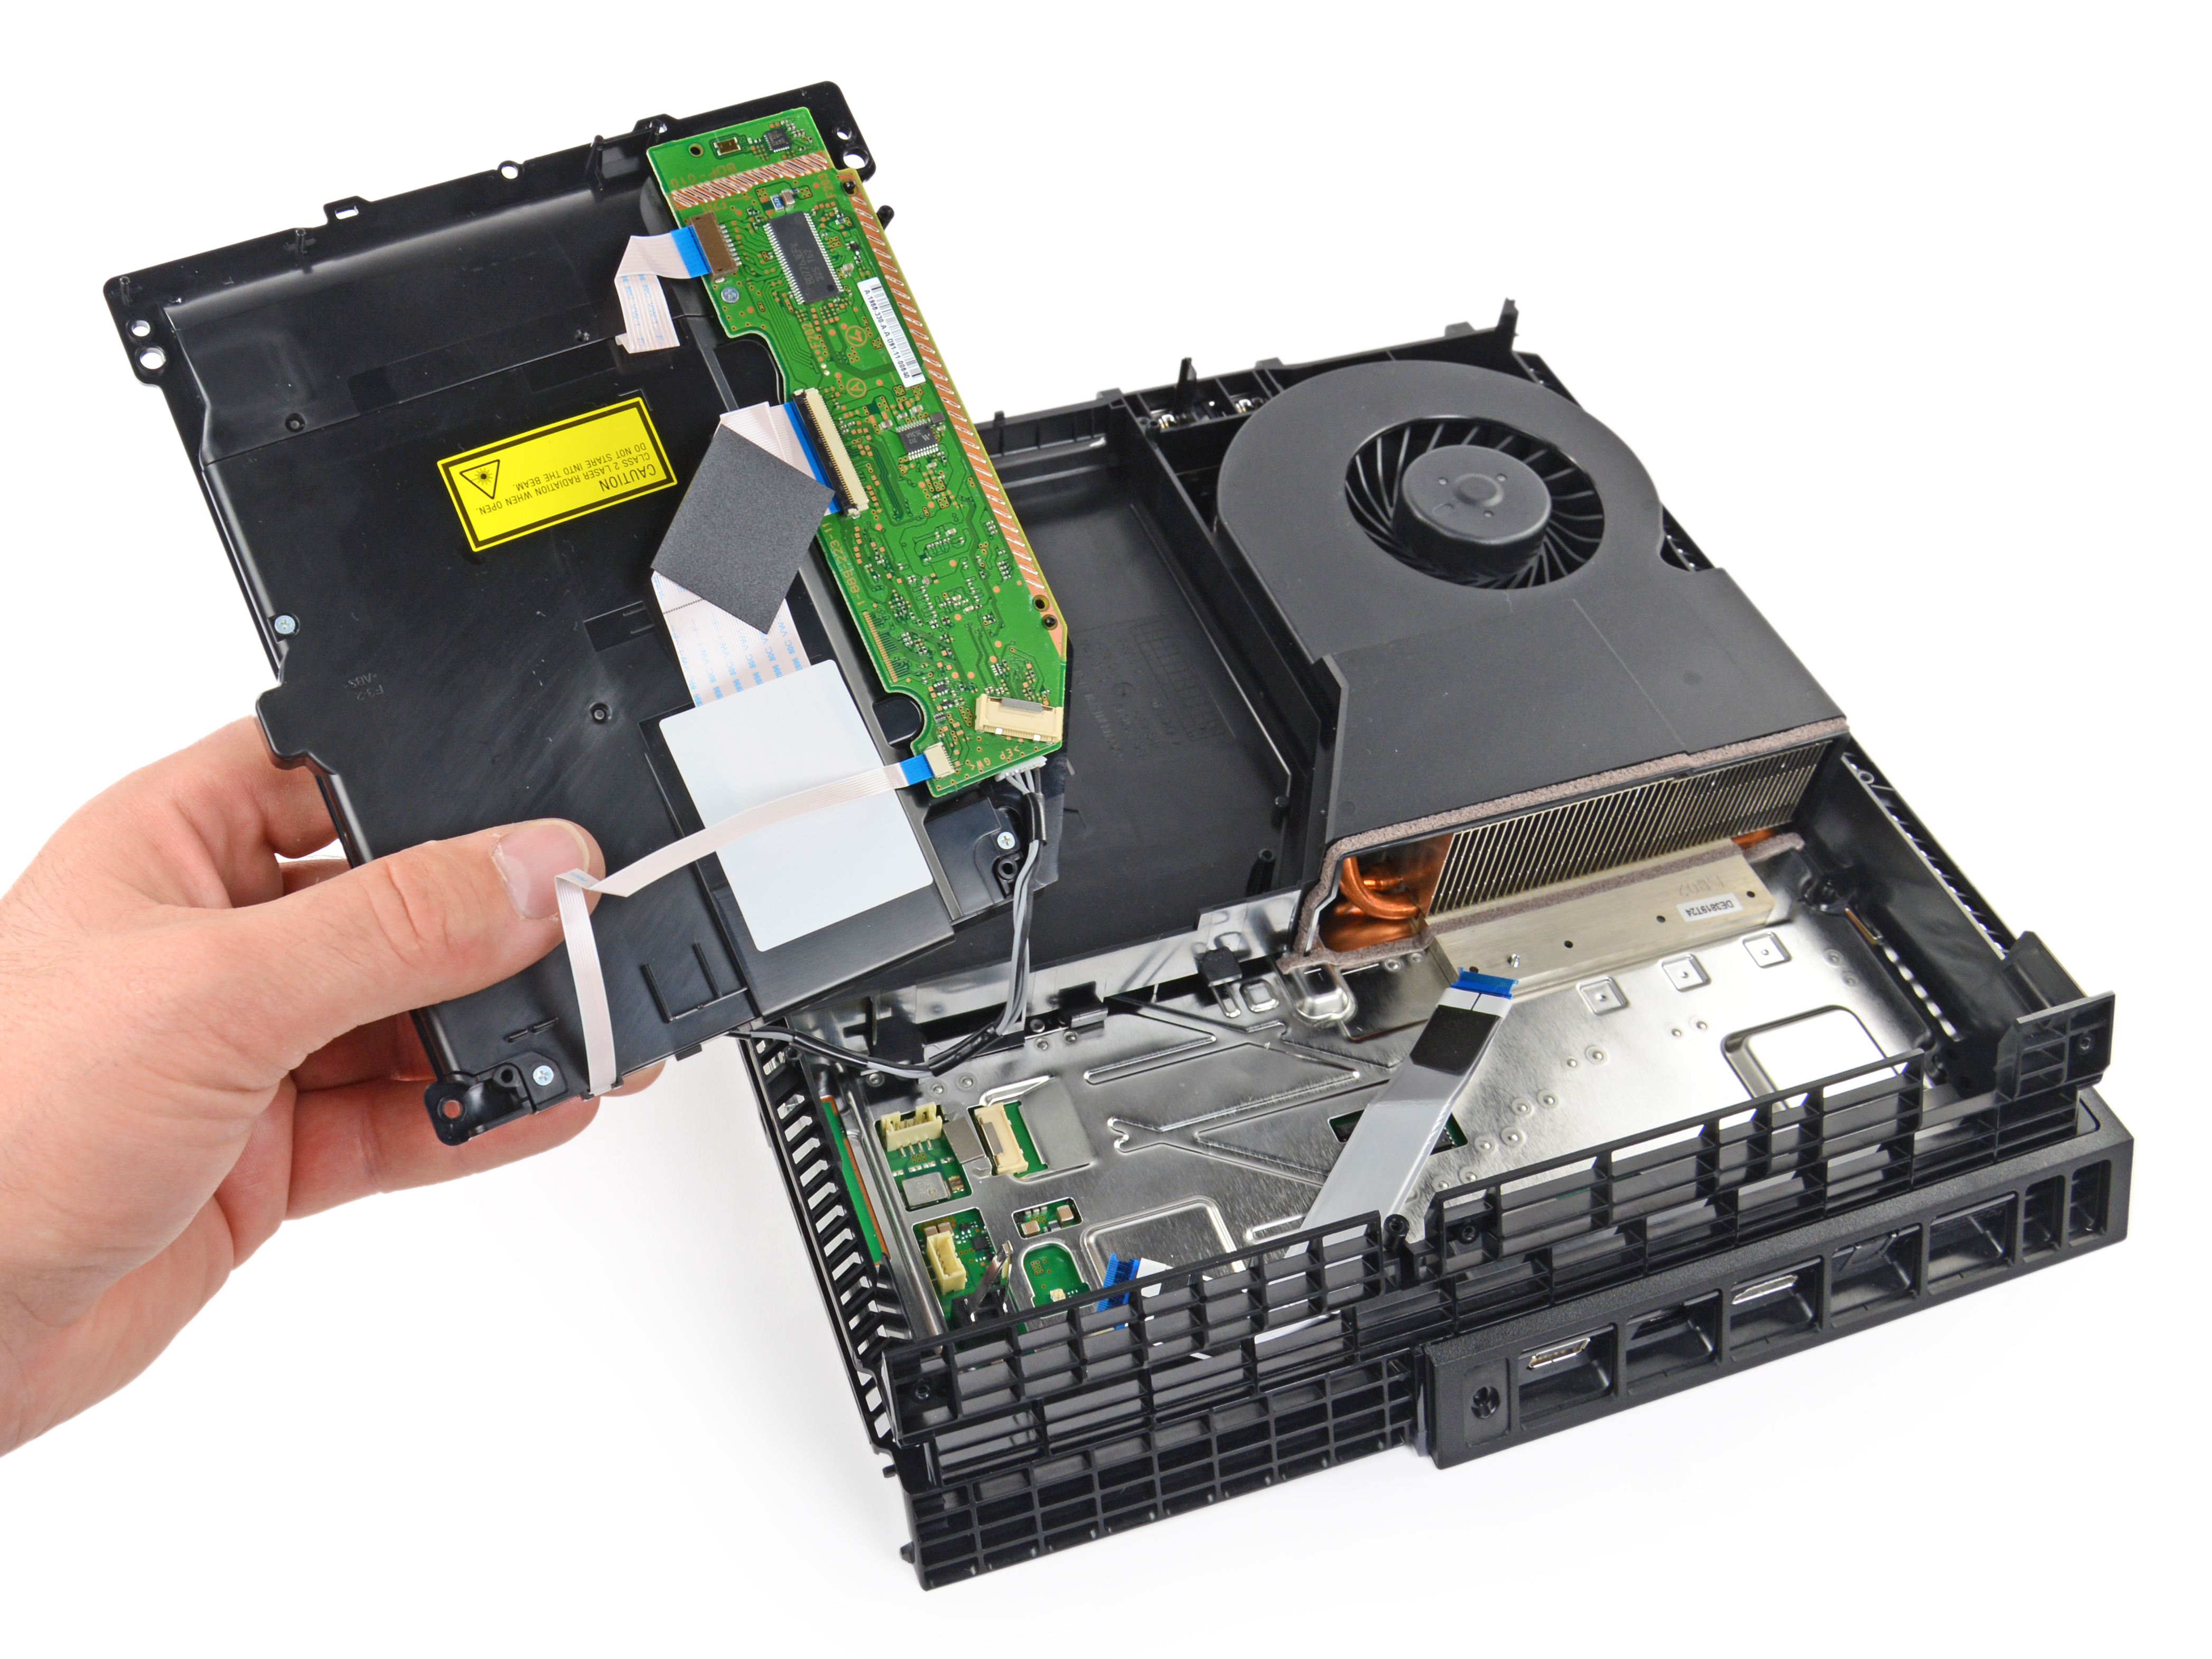 iFixit opens the Playstation 4—replaceable hard drive earns props Ars Technica